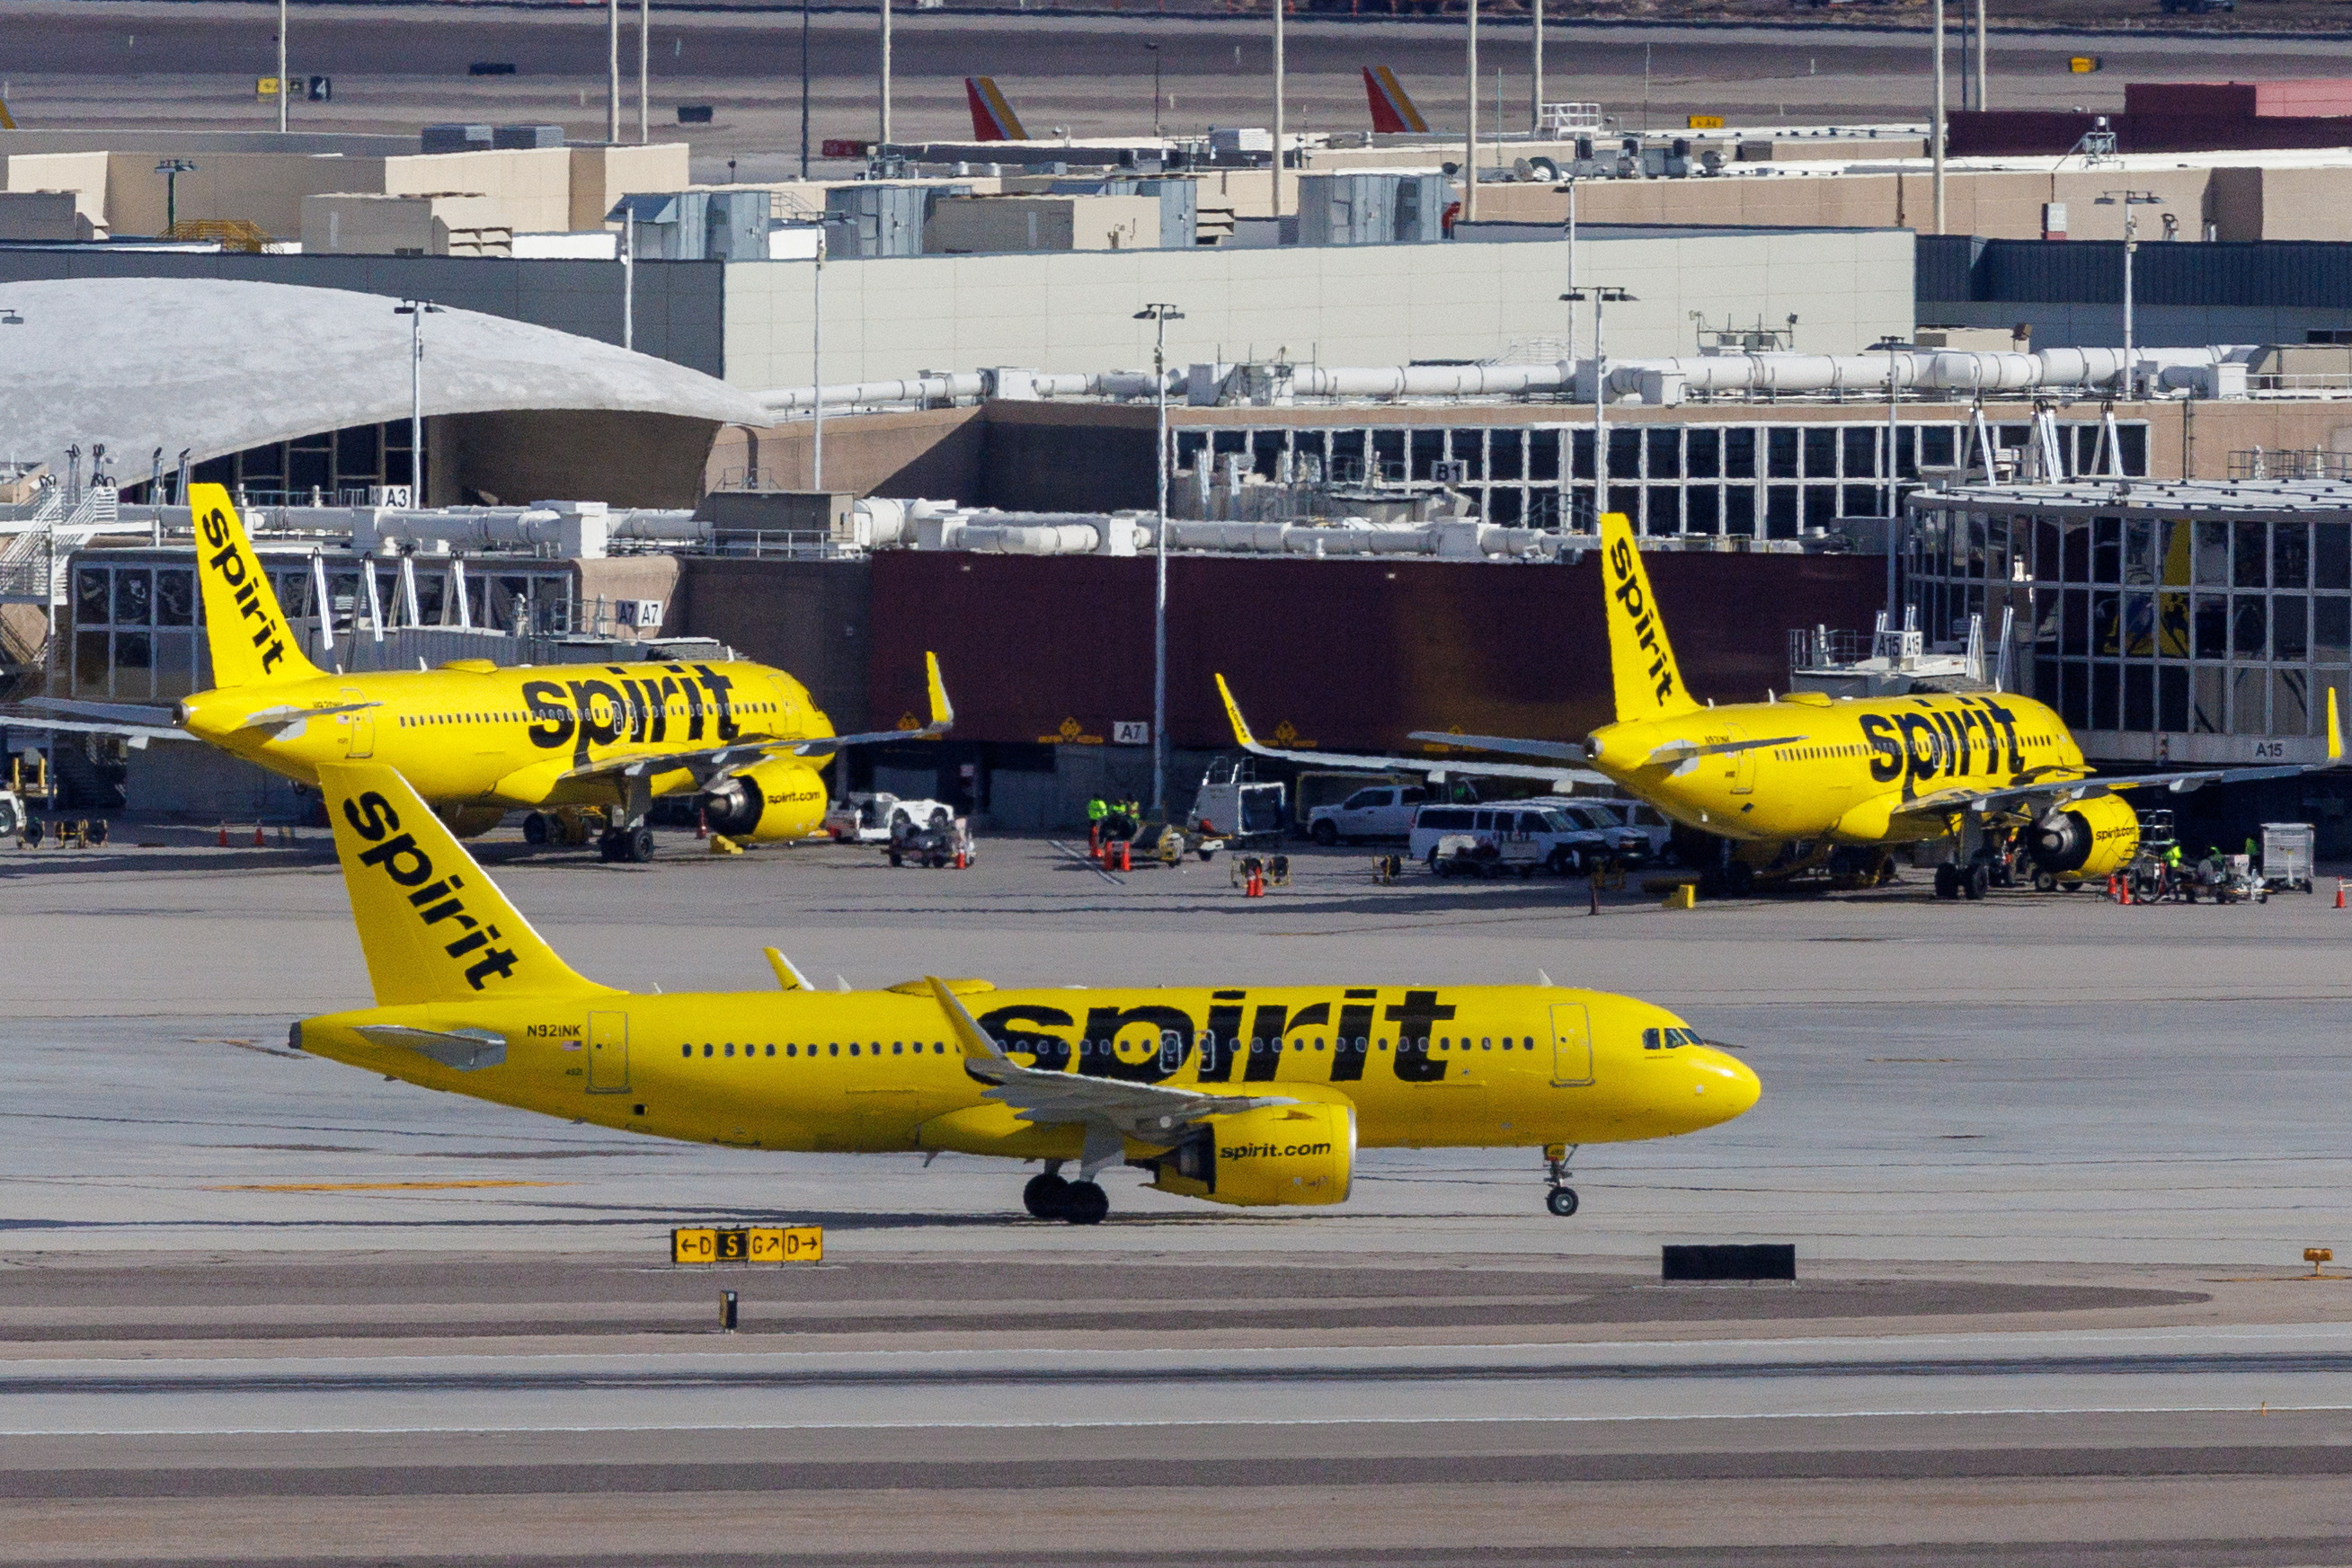 Spirit Airlines commercial aircraft in Las Vegas